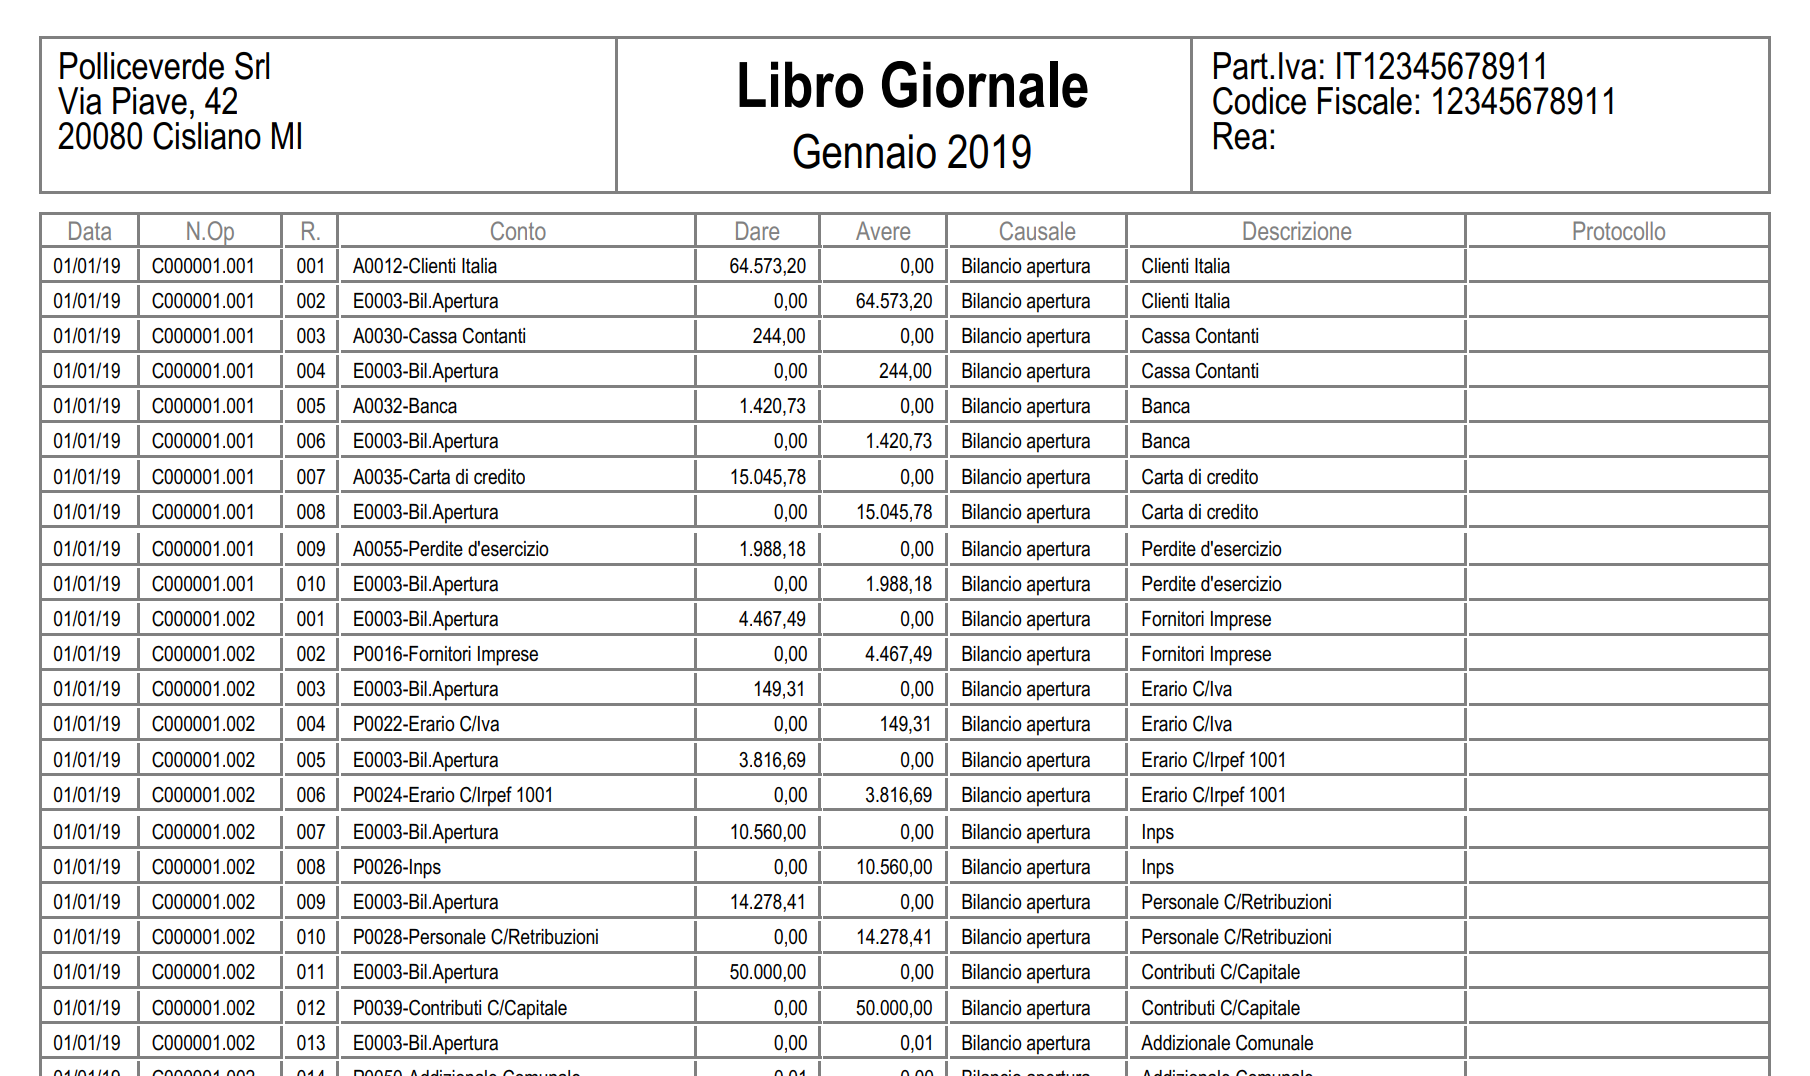 ../_images/stampa-libro-giornale-esempio.png